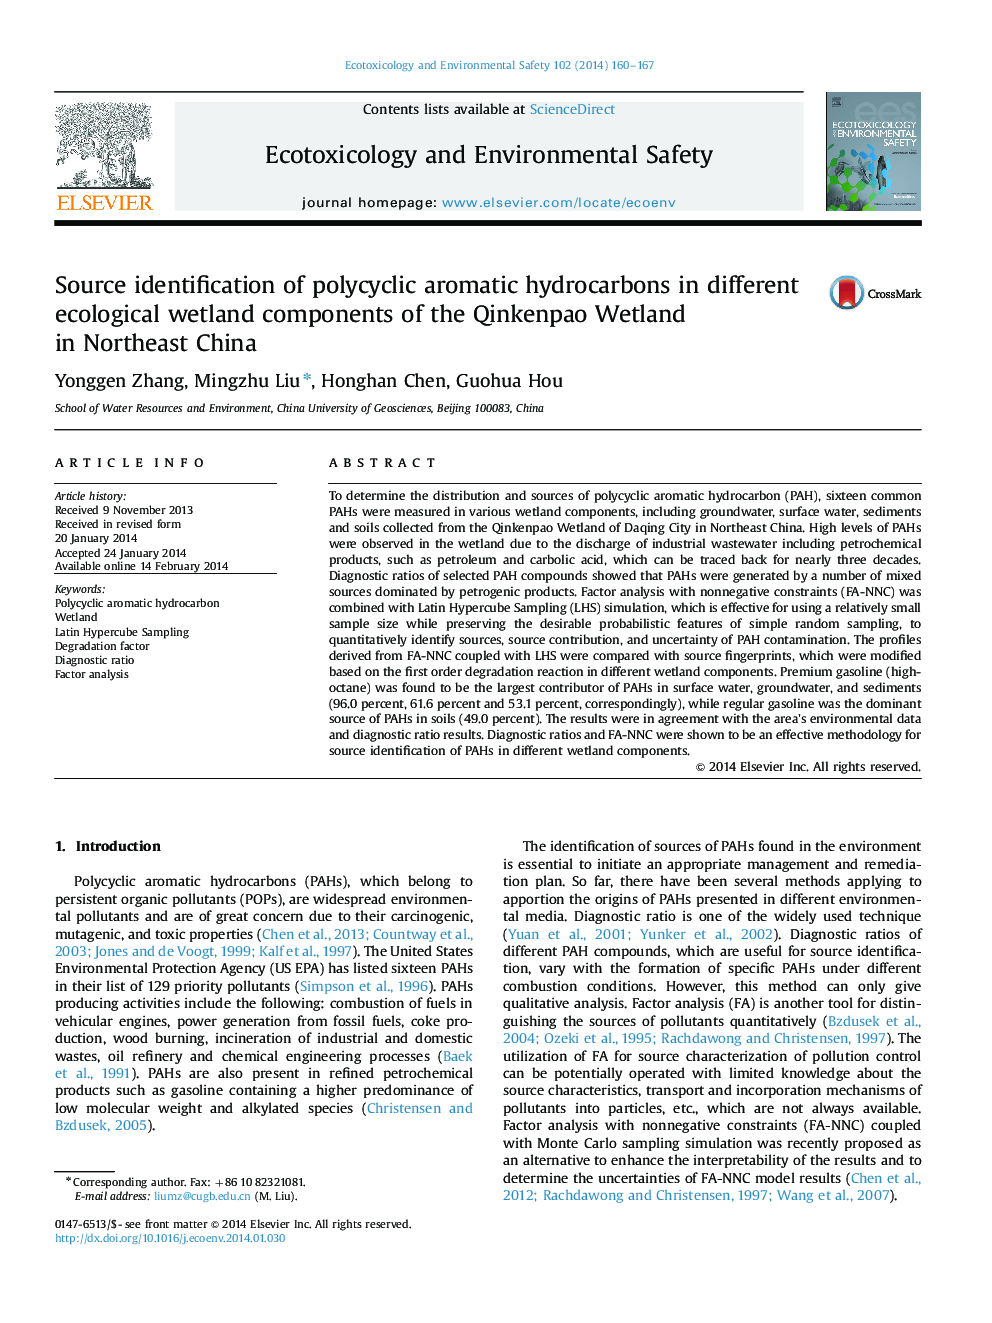 Source identification of polycyclic aromatic hydrocarbons in different ecological wetland components of the Qinkenpao Wetland in Northeast China